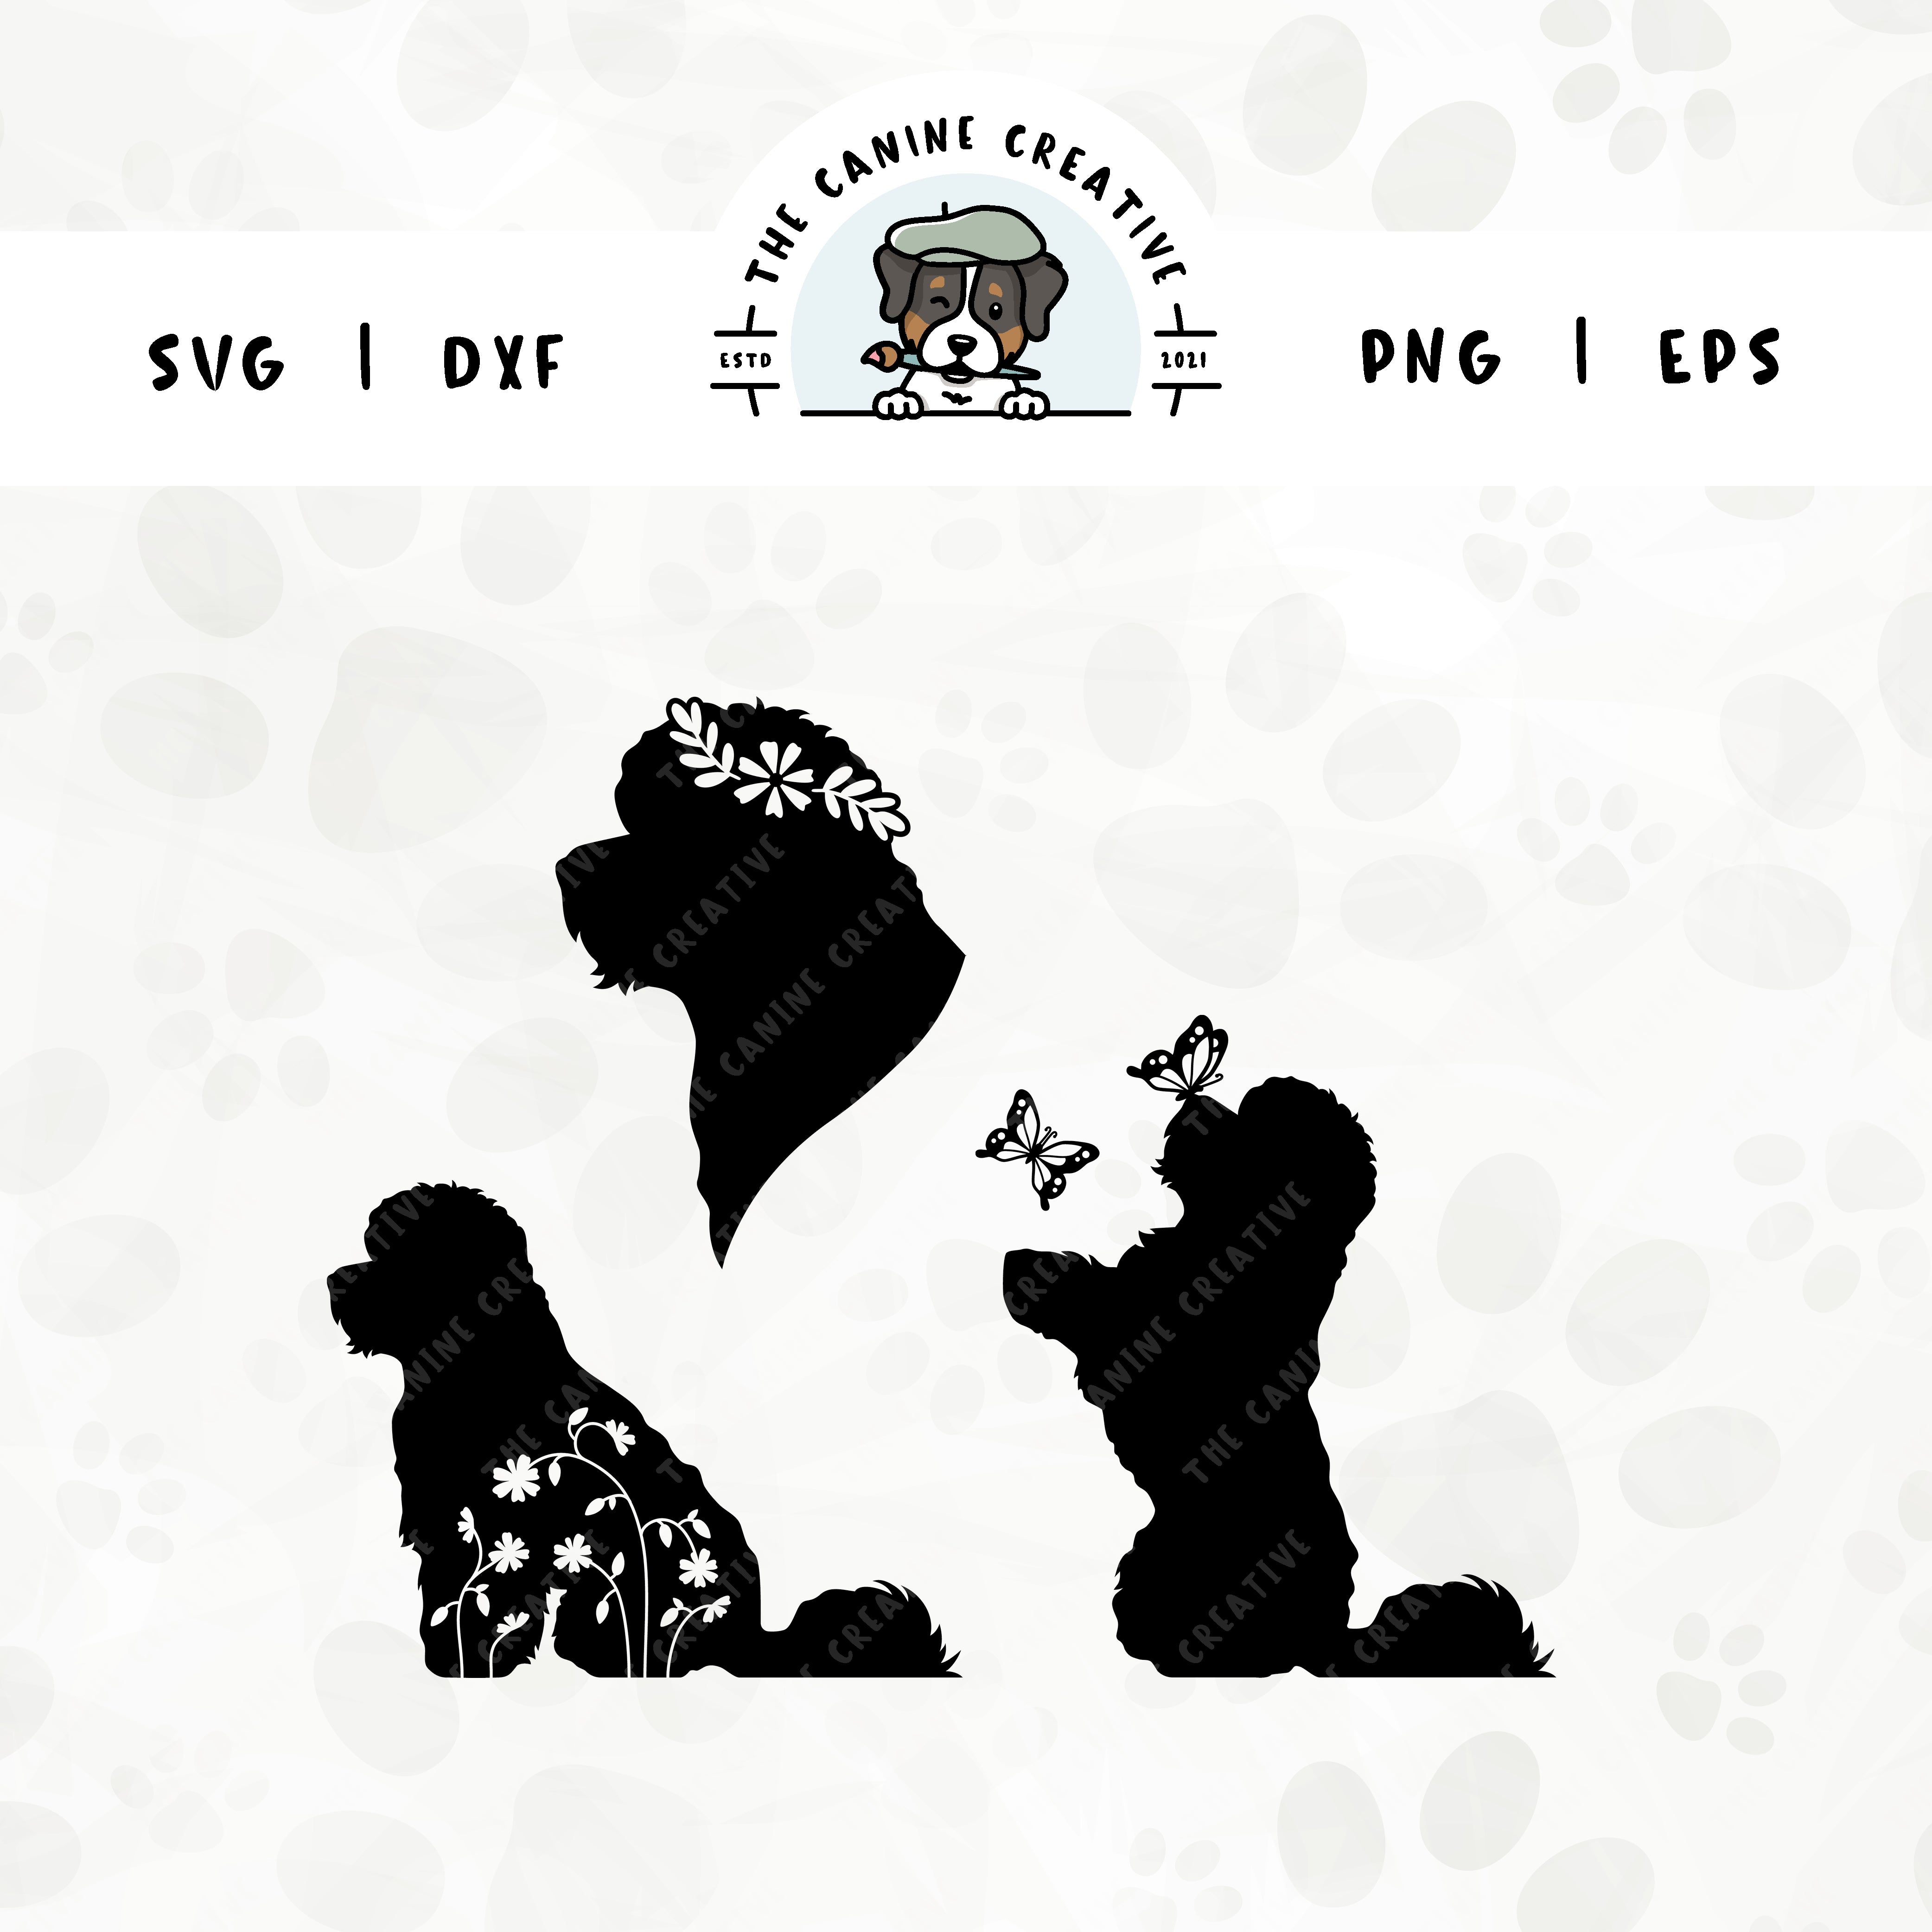 This 3-pack Bichon Frise silhouette bundle features a head portrait of a dog wearing a floral crown, a sitting dog with inset flowers, and a dog interacting with butterflies. File formats include: SVG, DXF, PNG, and EPS.